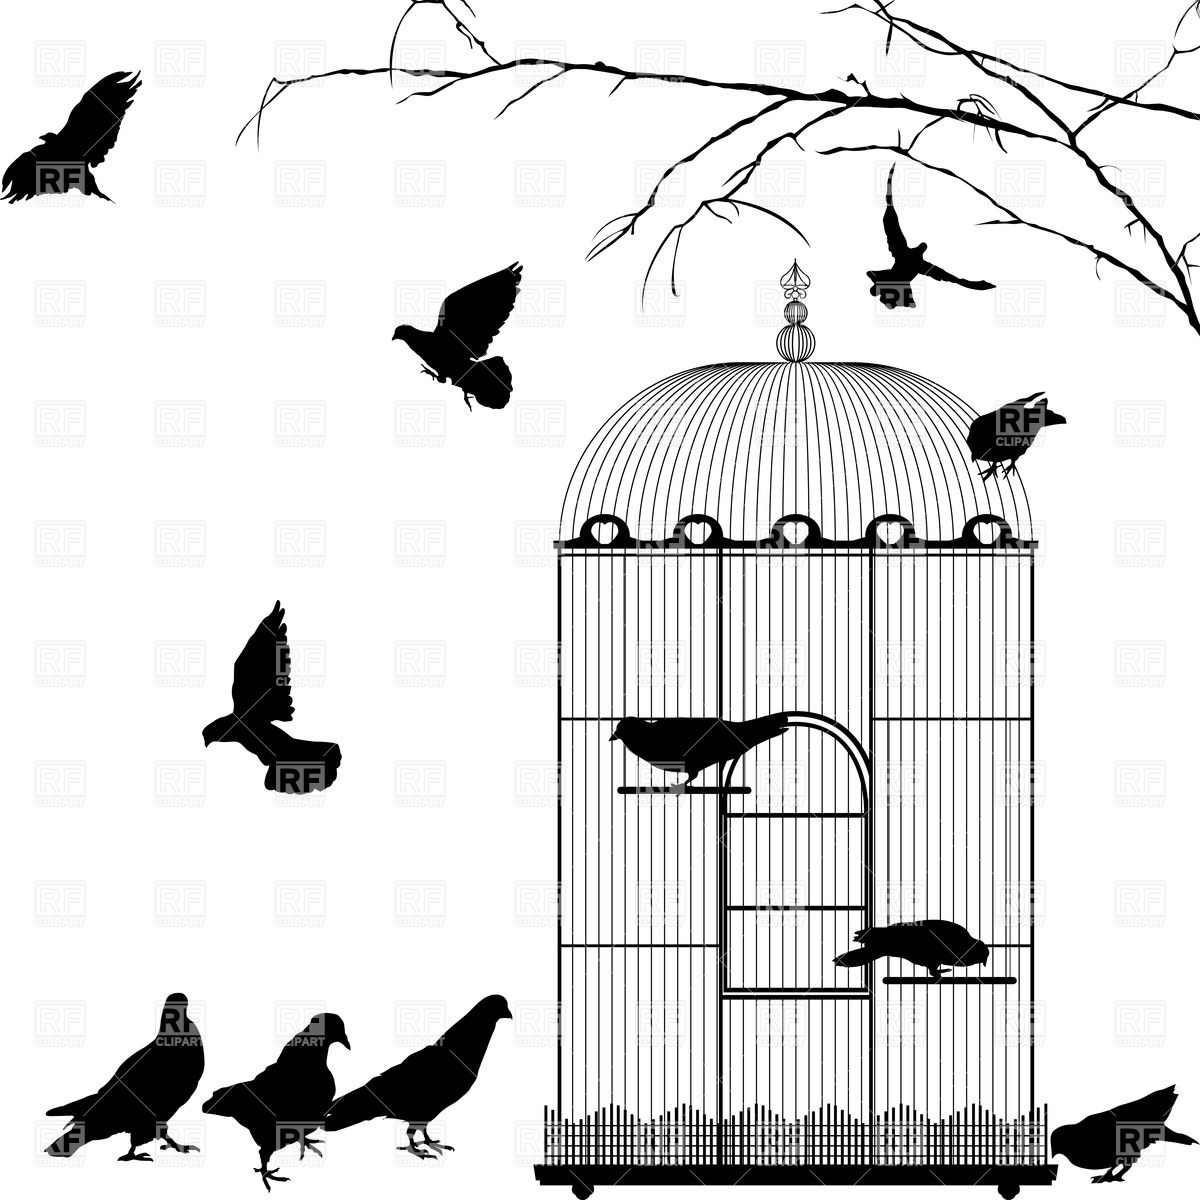 Birdcage and silhouettes of birds Vector Image #38381.